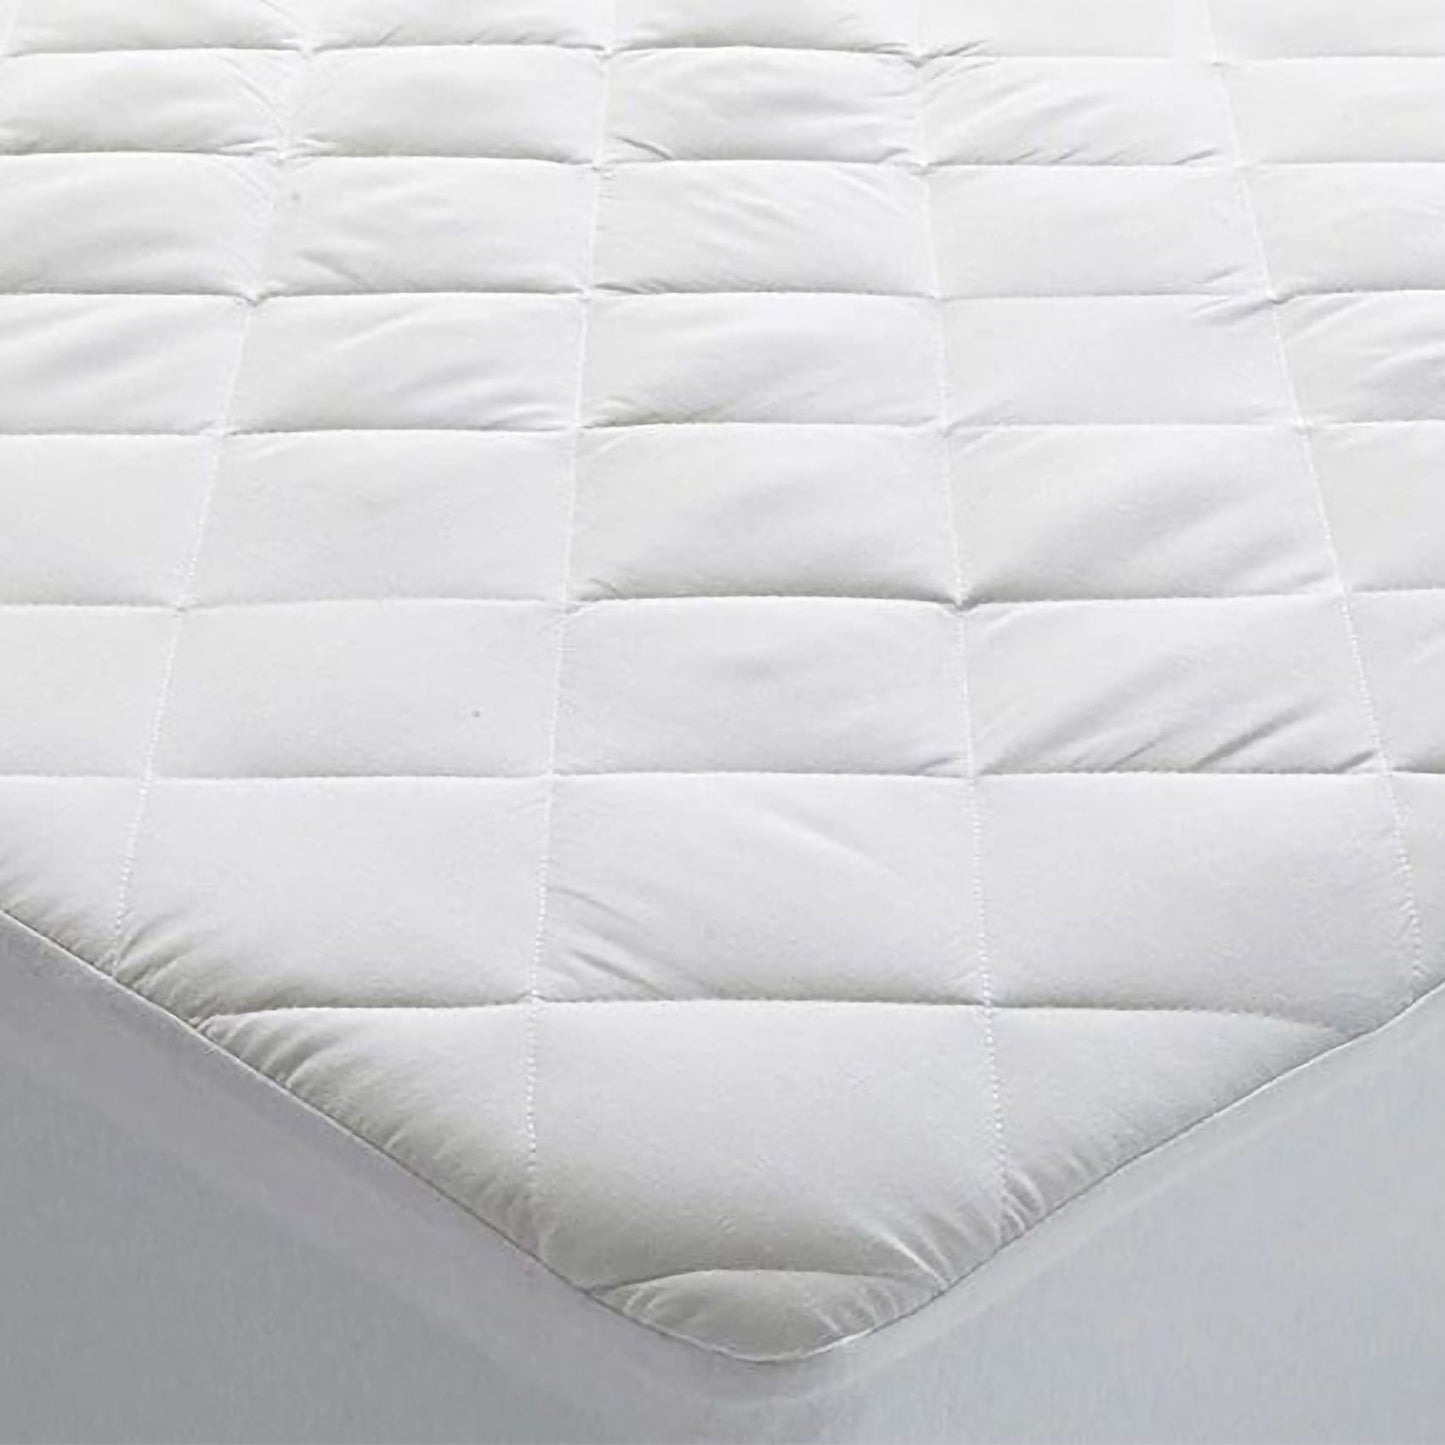 Comfortable Fitted Waterproof Mattress Protectors 100 Gsm TPU coating